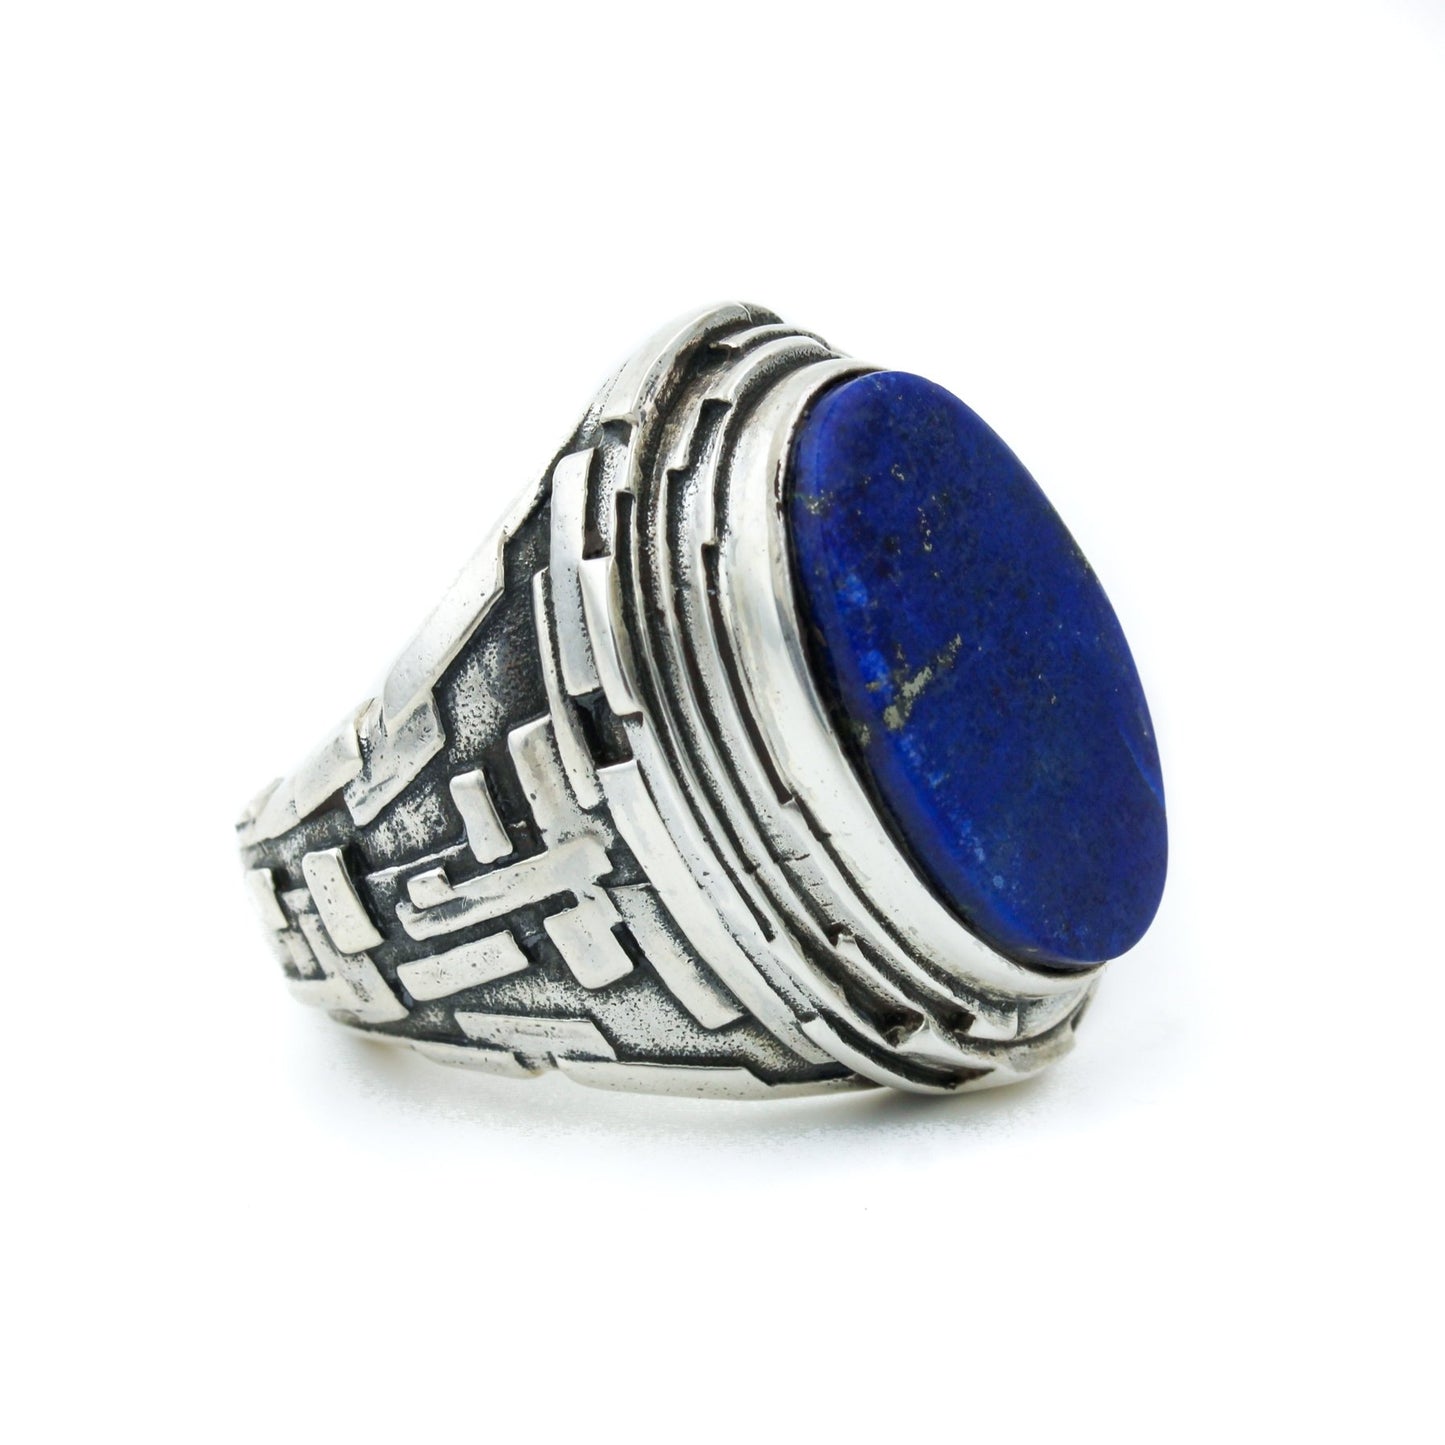 "Fractal" Ring with Lapis - Kingdom Jewelry